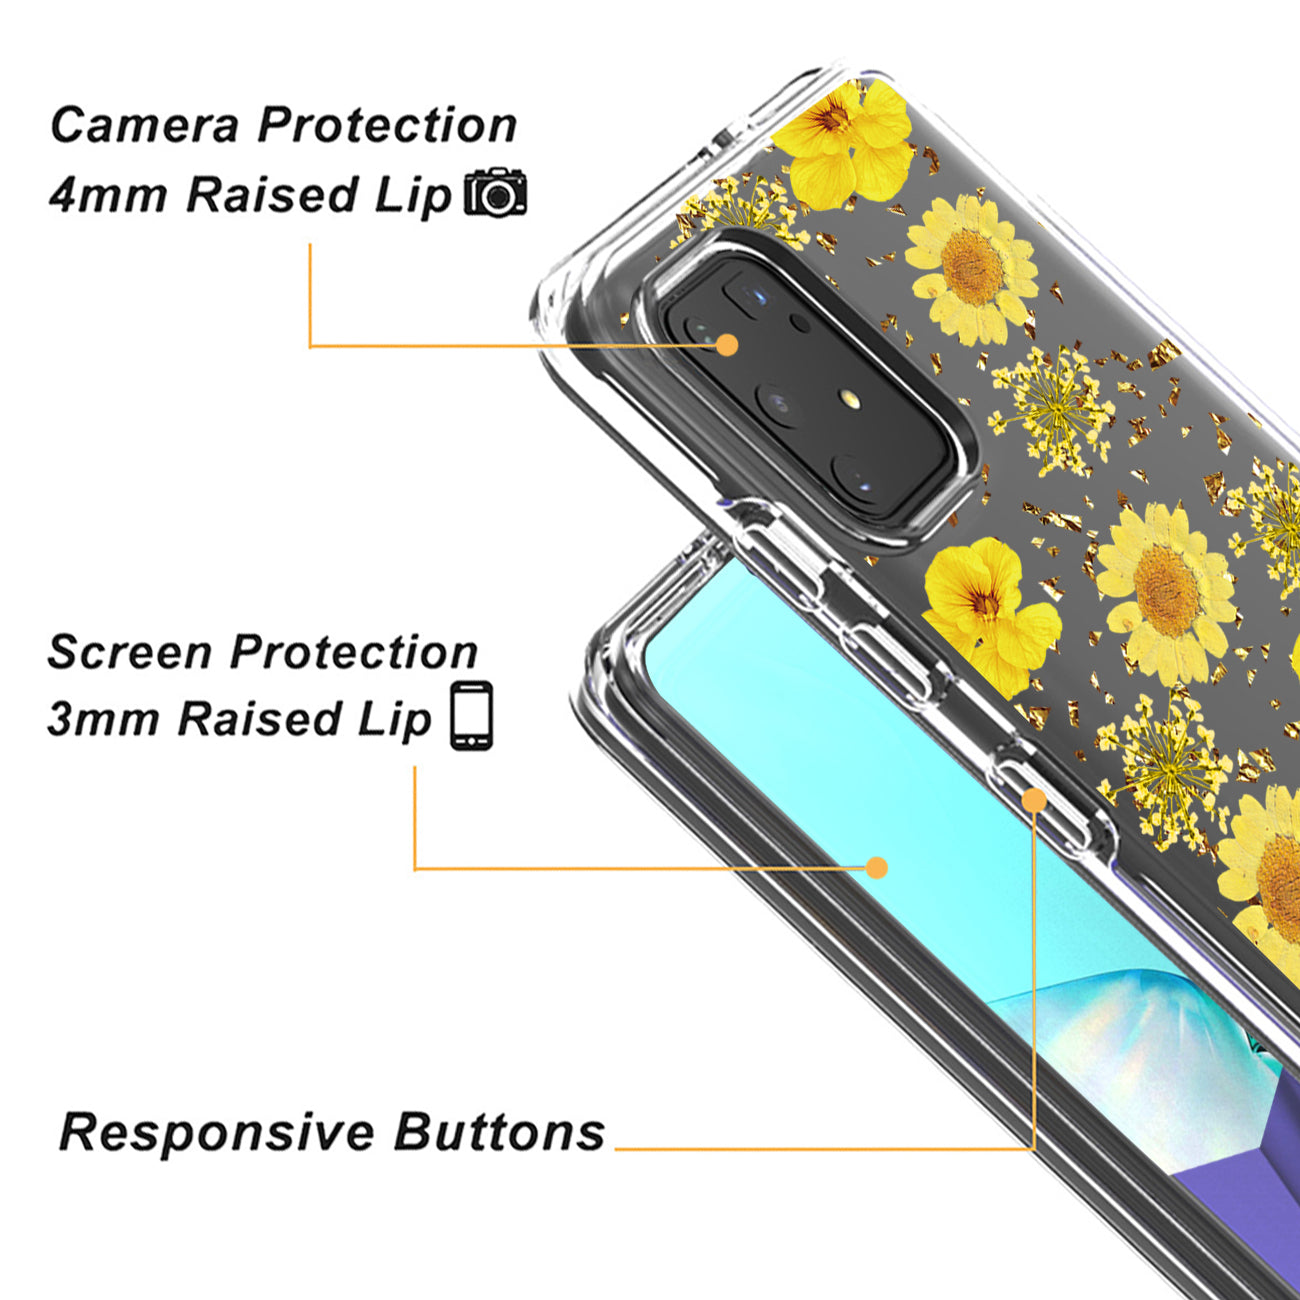 Pressed dried flower Design Phone case for SAMSUNG GALAXY A91/S10 Lite/M80S In Yellow